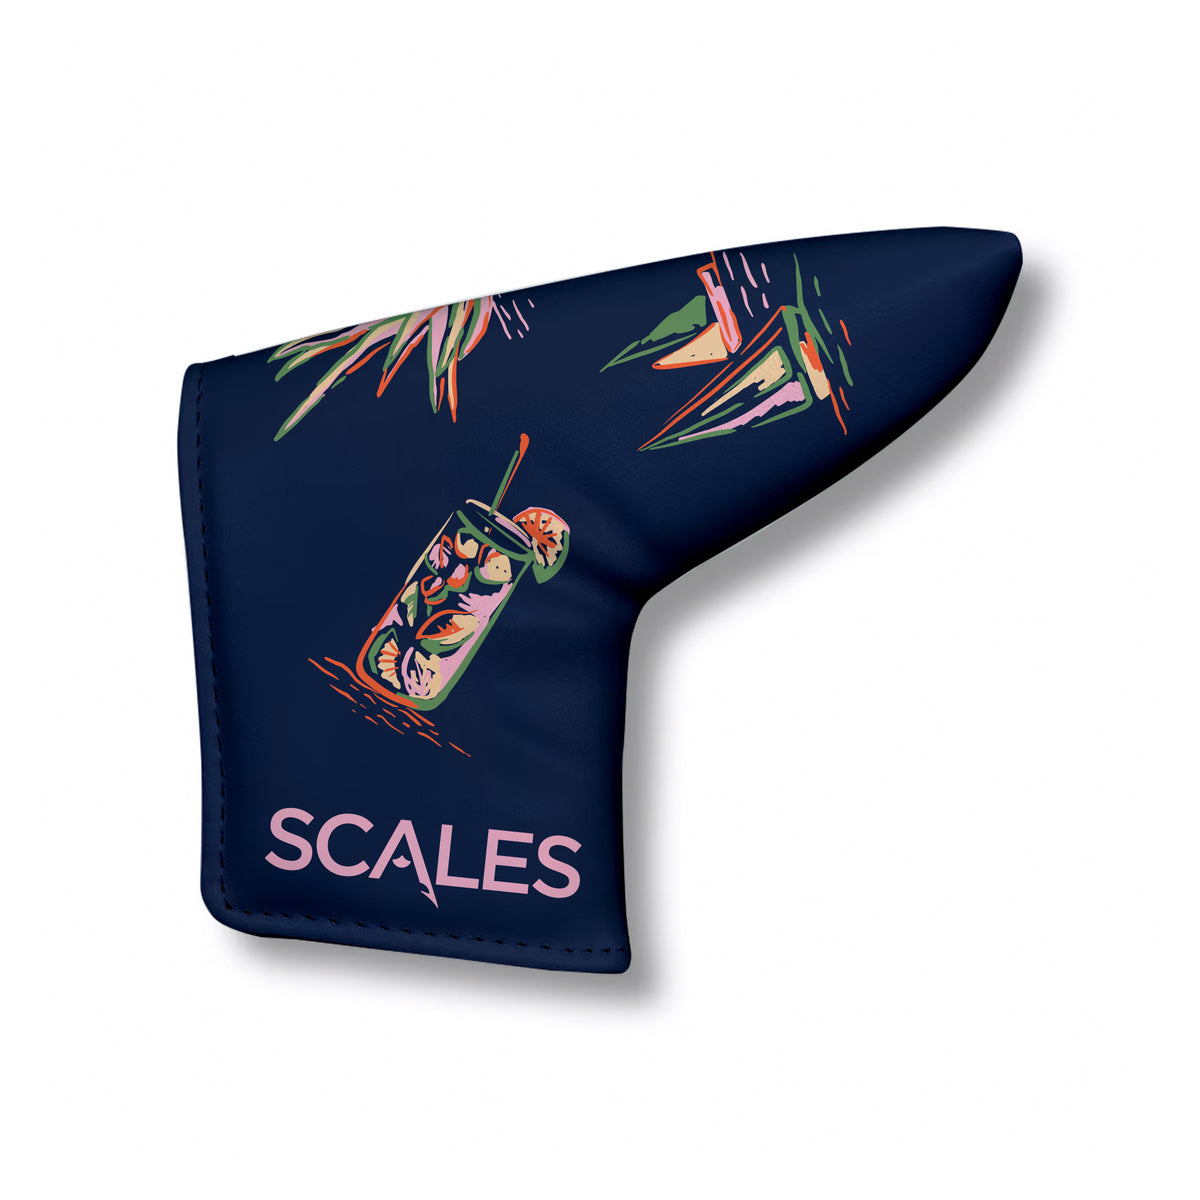 SCALES Happy Flamingo Blade Putter Cover